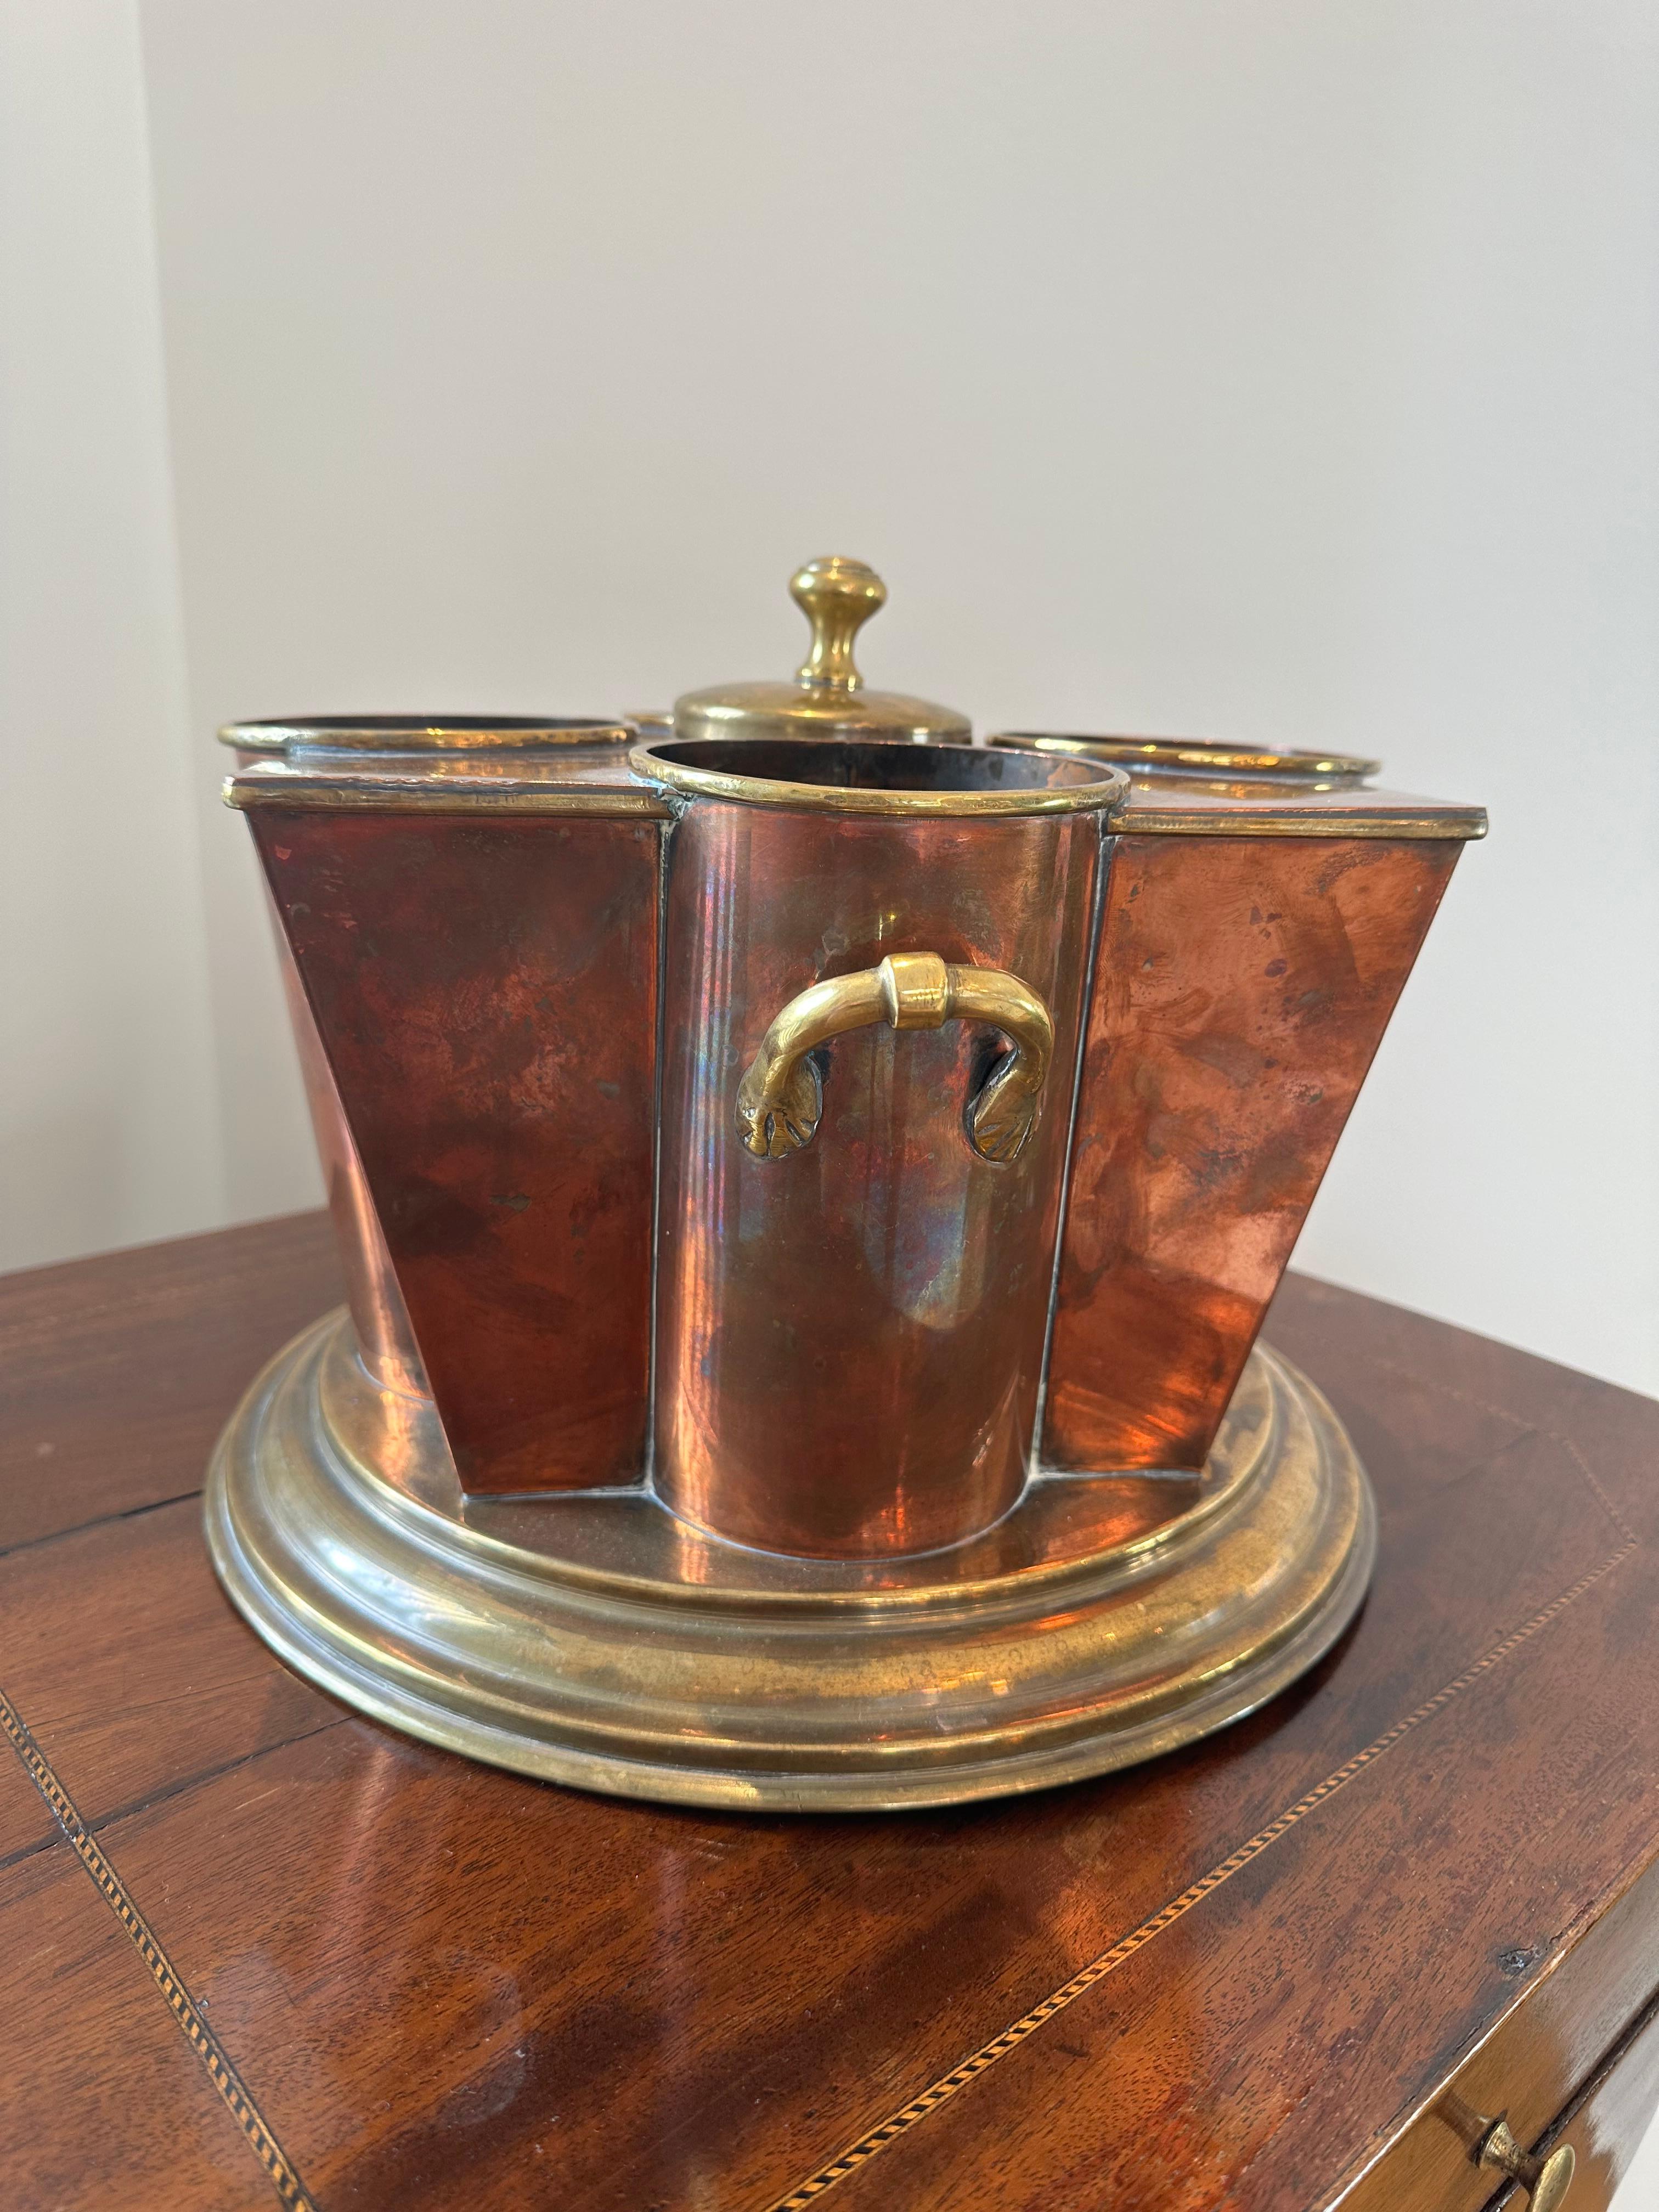 20th Century Art Deco Champagne Cooler by G.Peak & Co, London. For Sale